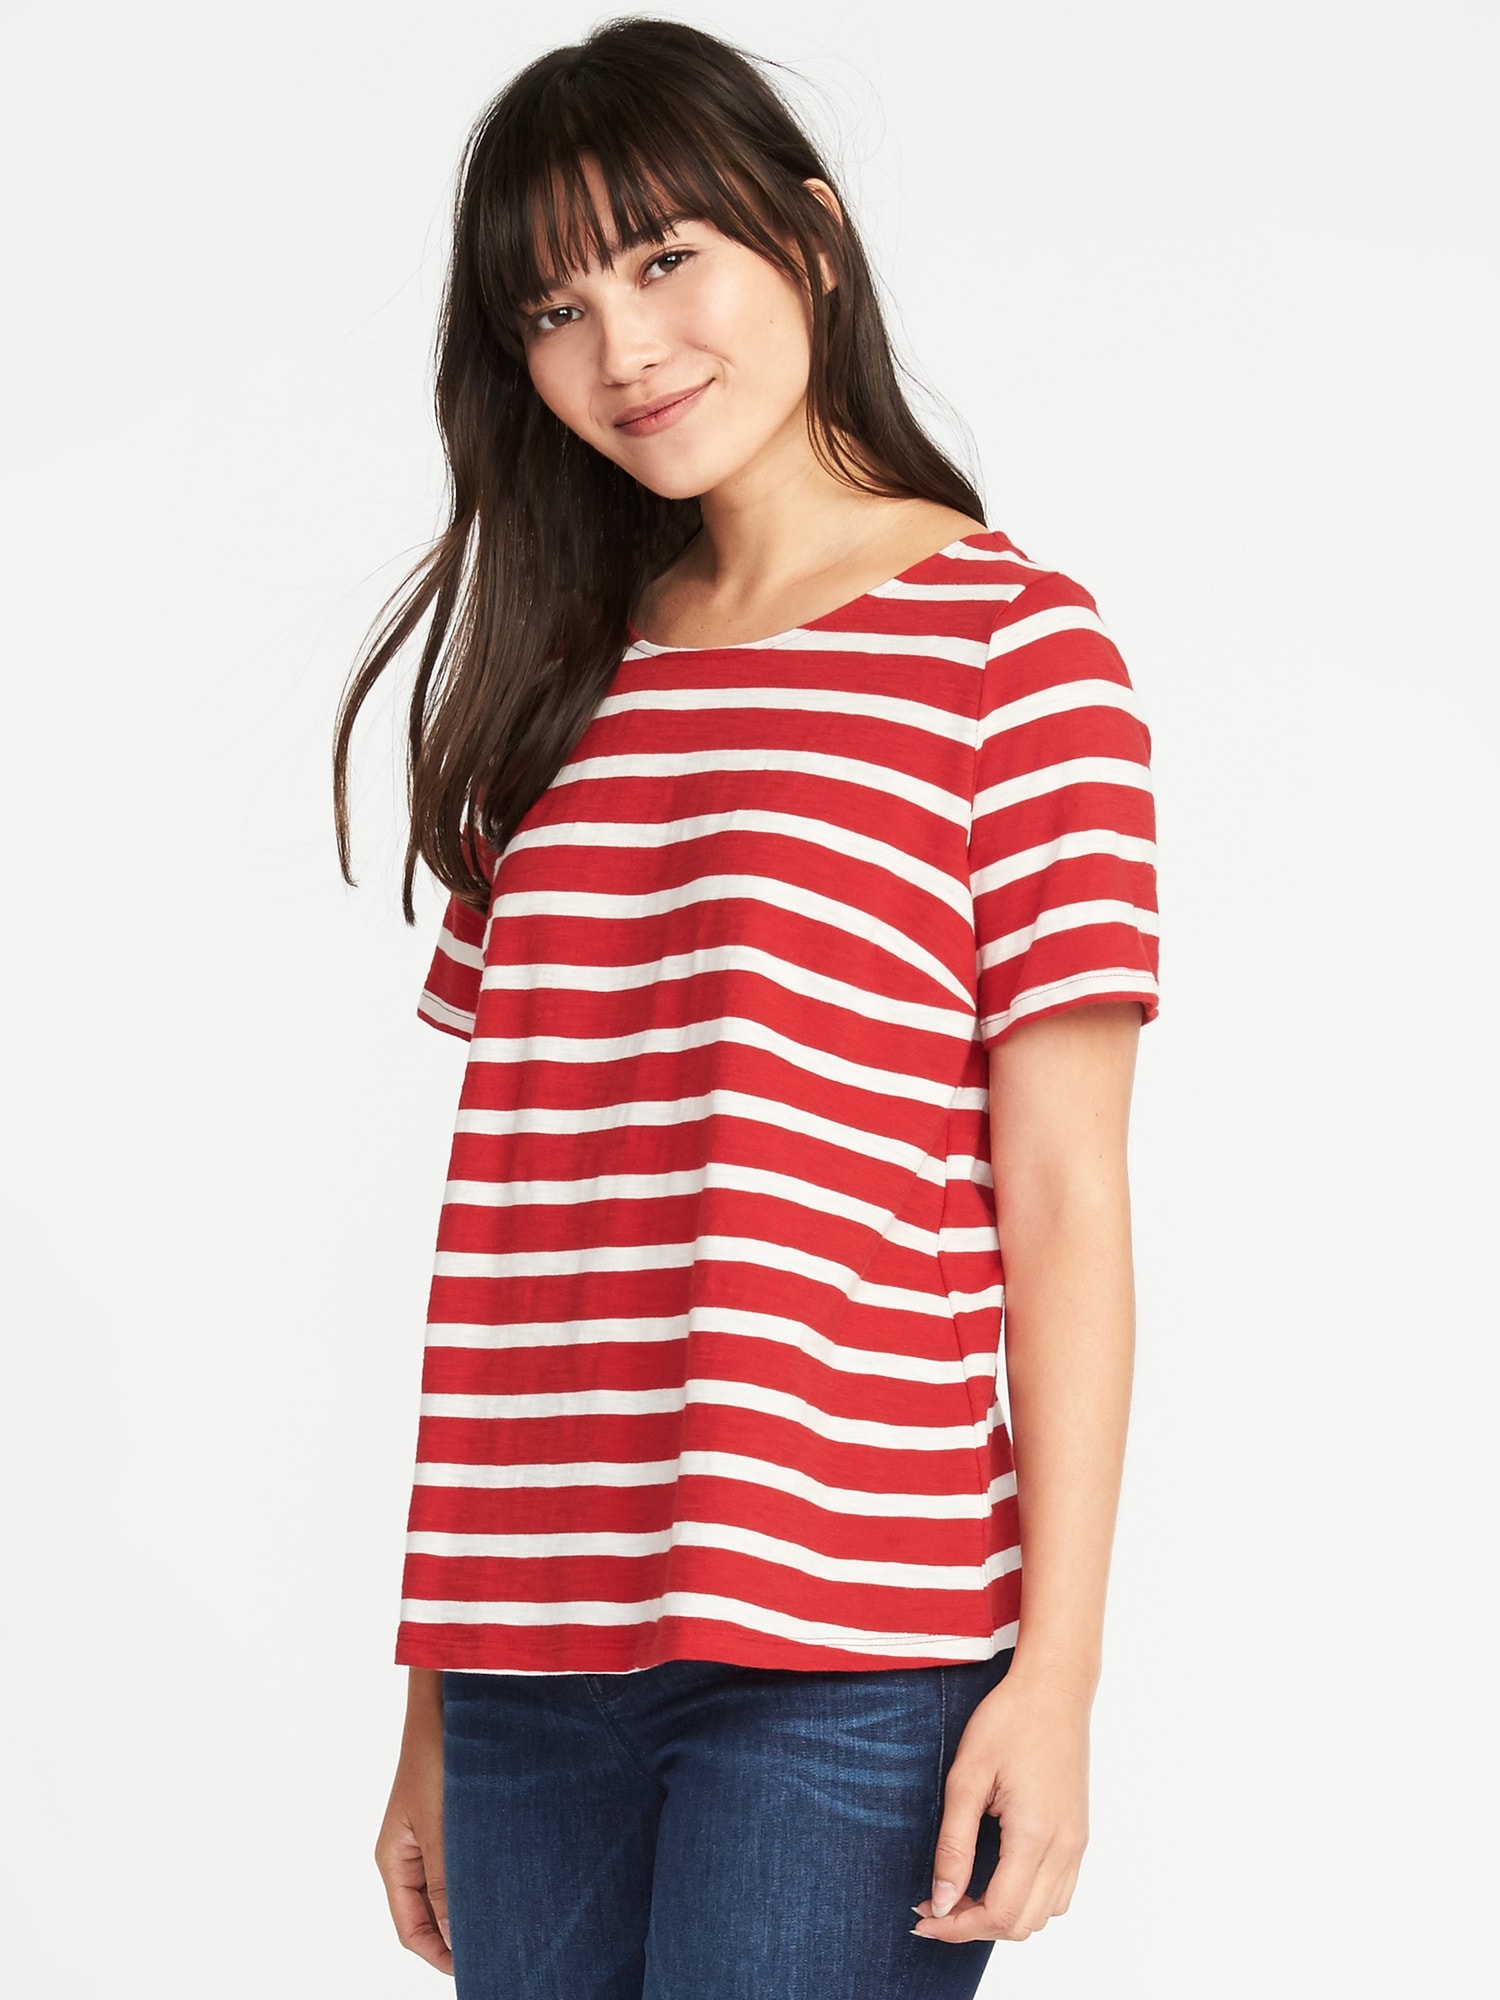 Relaxed Slub-Knit Lace-Up Top for Women | Old Navy